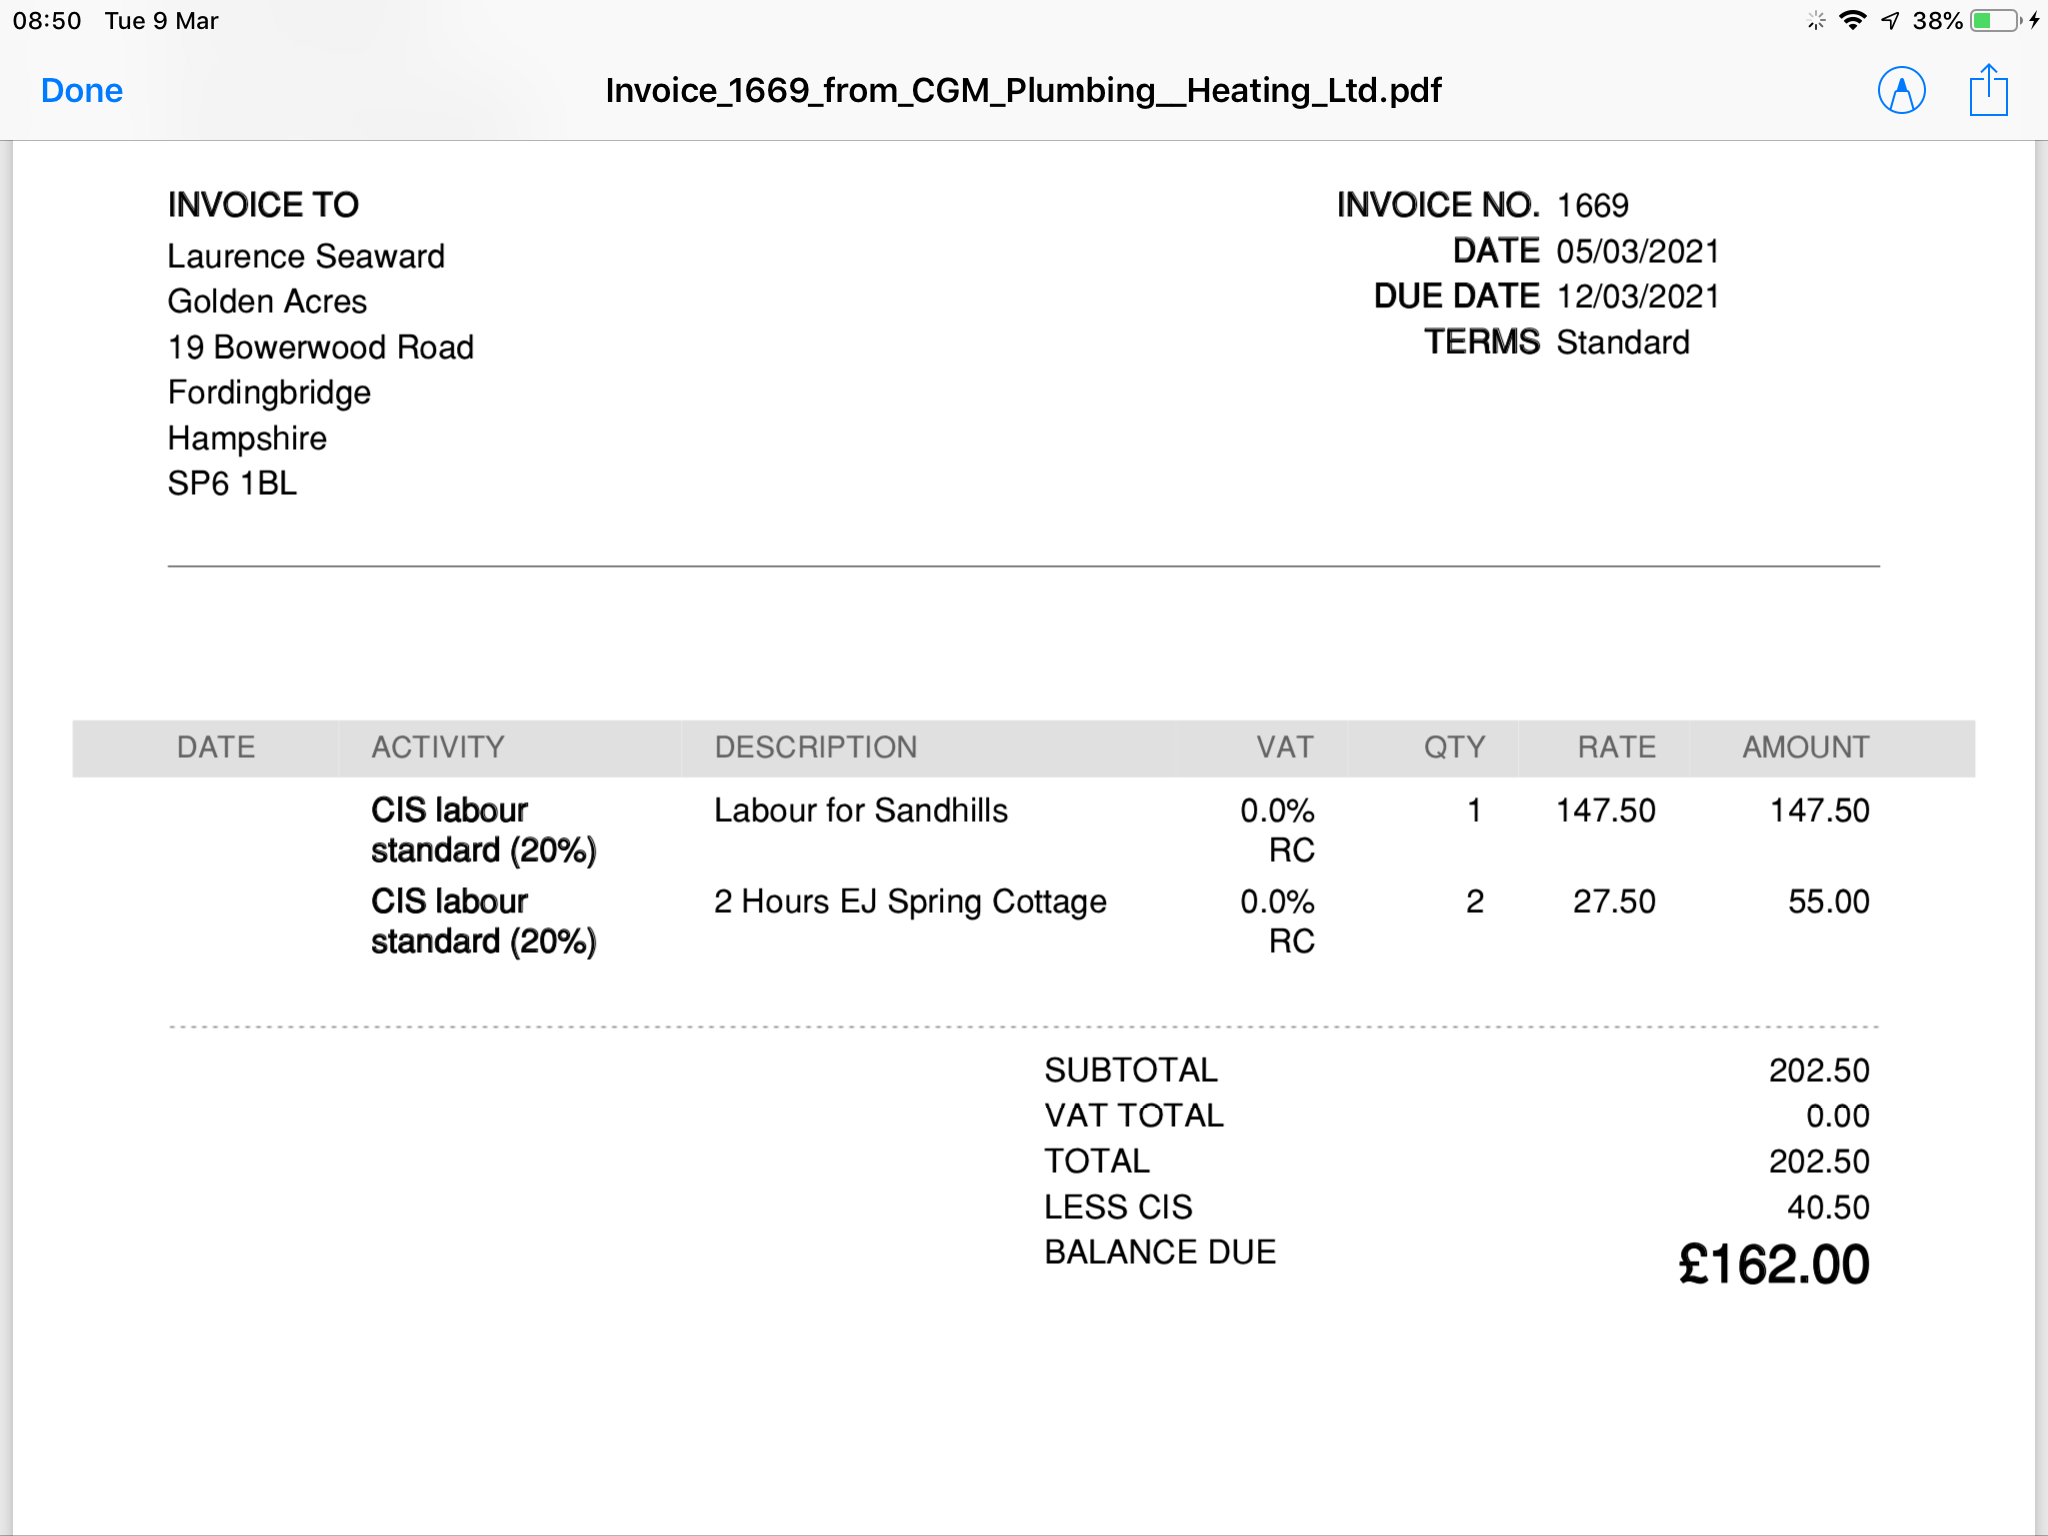 domestic-reverse-charge-invoice-template-https-www-nordea-com-images